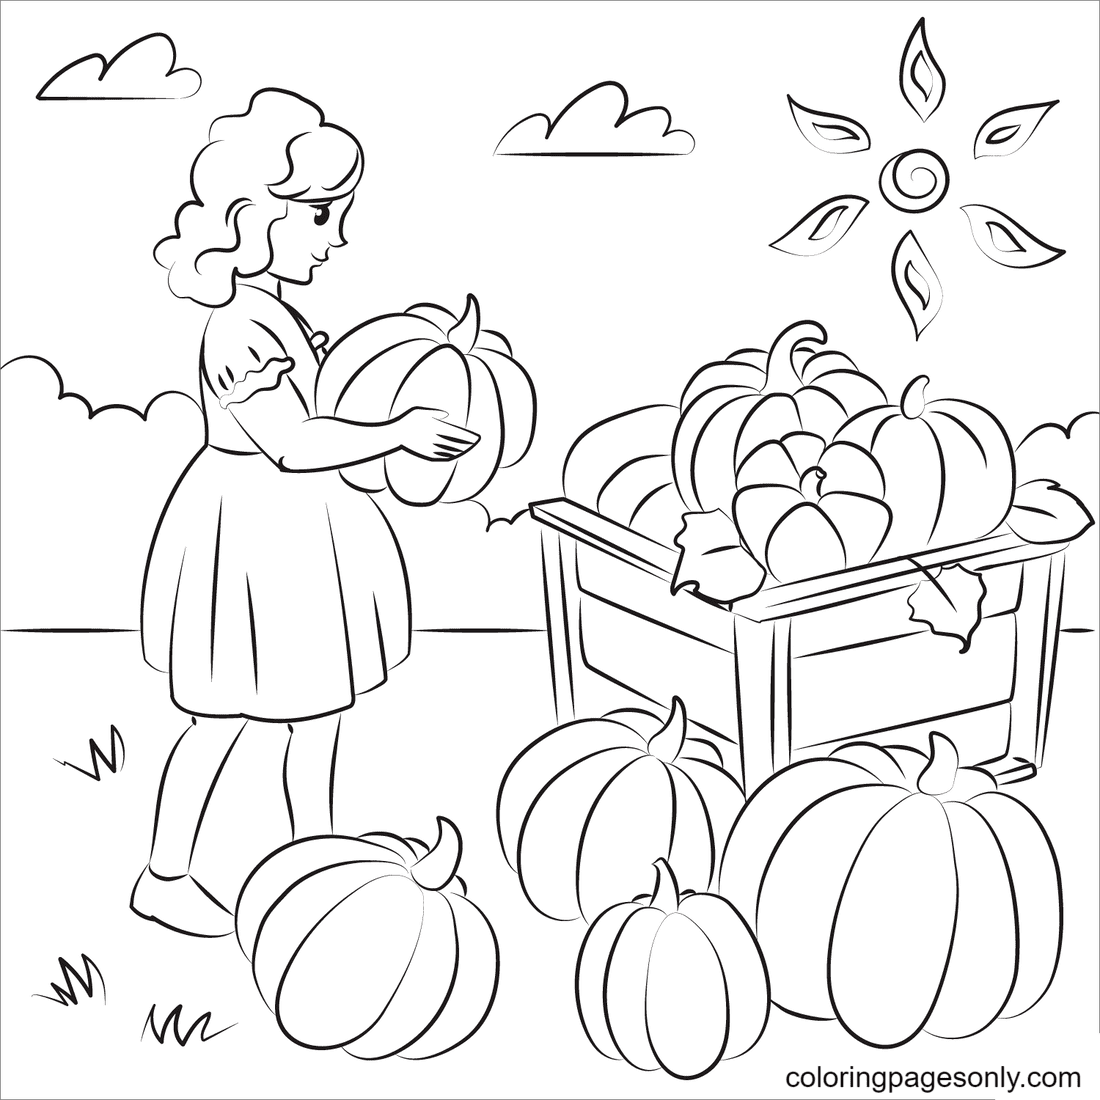 Harvest with Pumpkins Coloring Pages